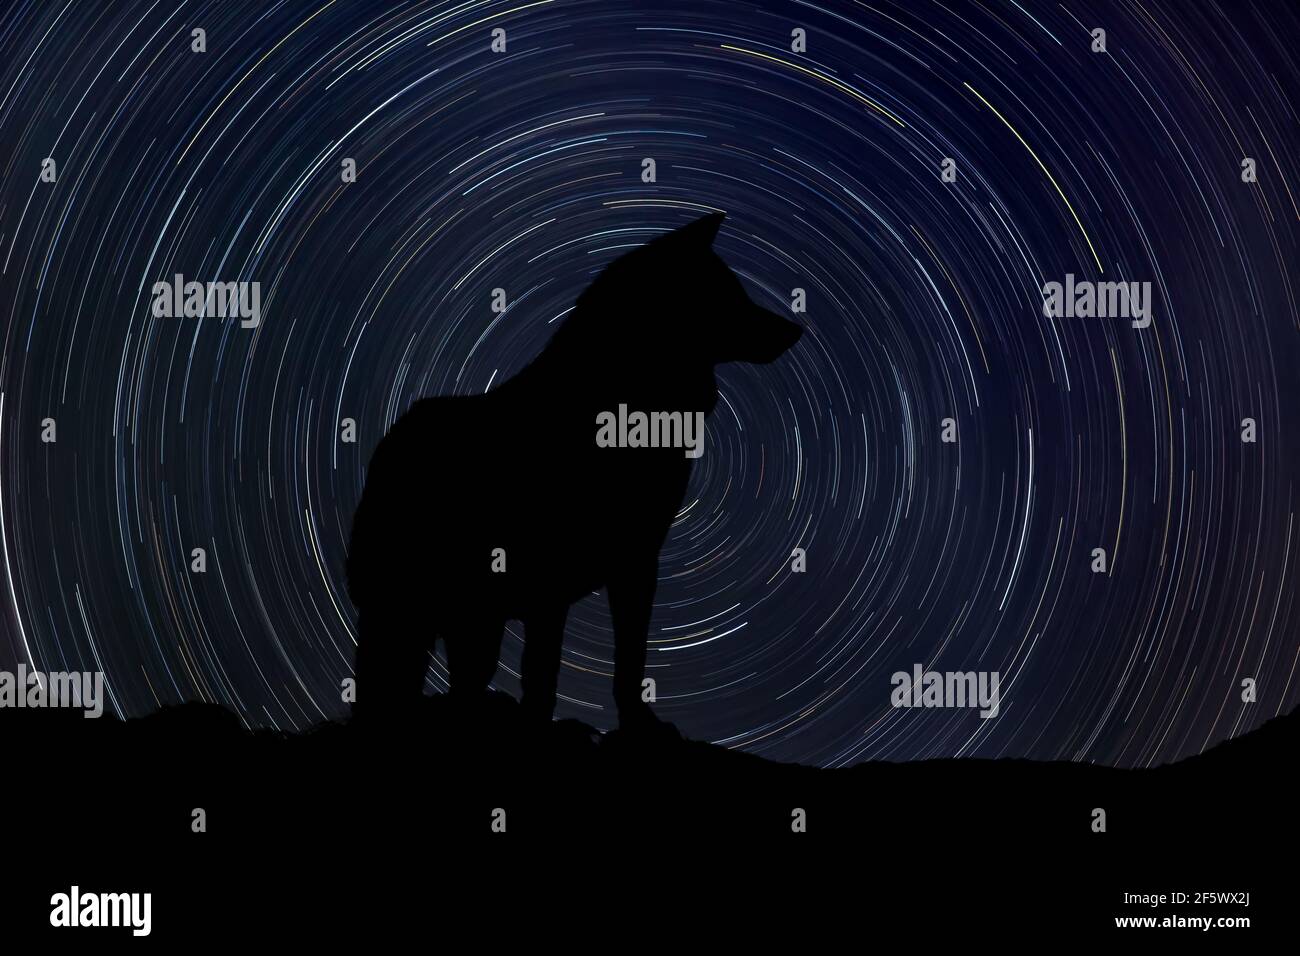 Silhouette of wolf at night with startrail in the background Stock Photo